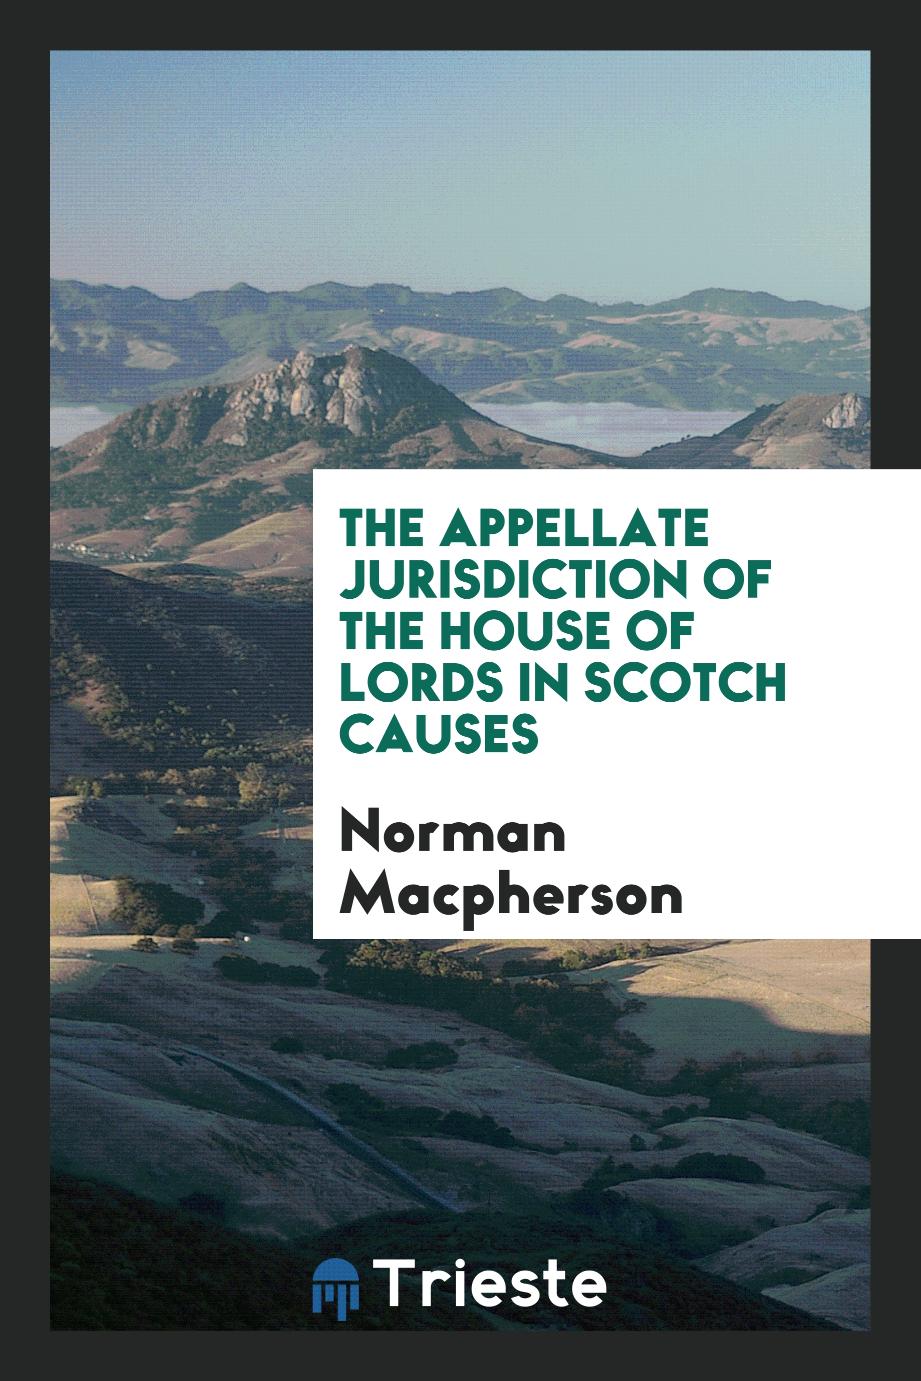 The Appellate Jurisdiction of the House of Lords in Scotch Causes